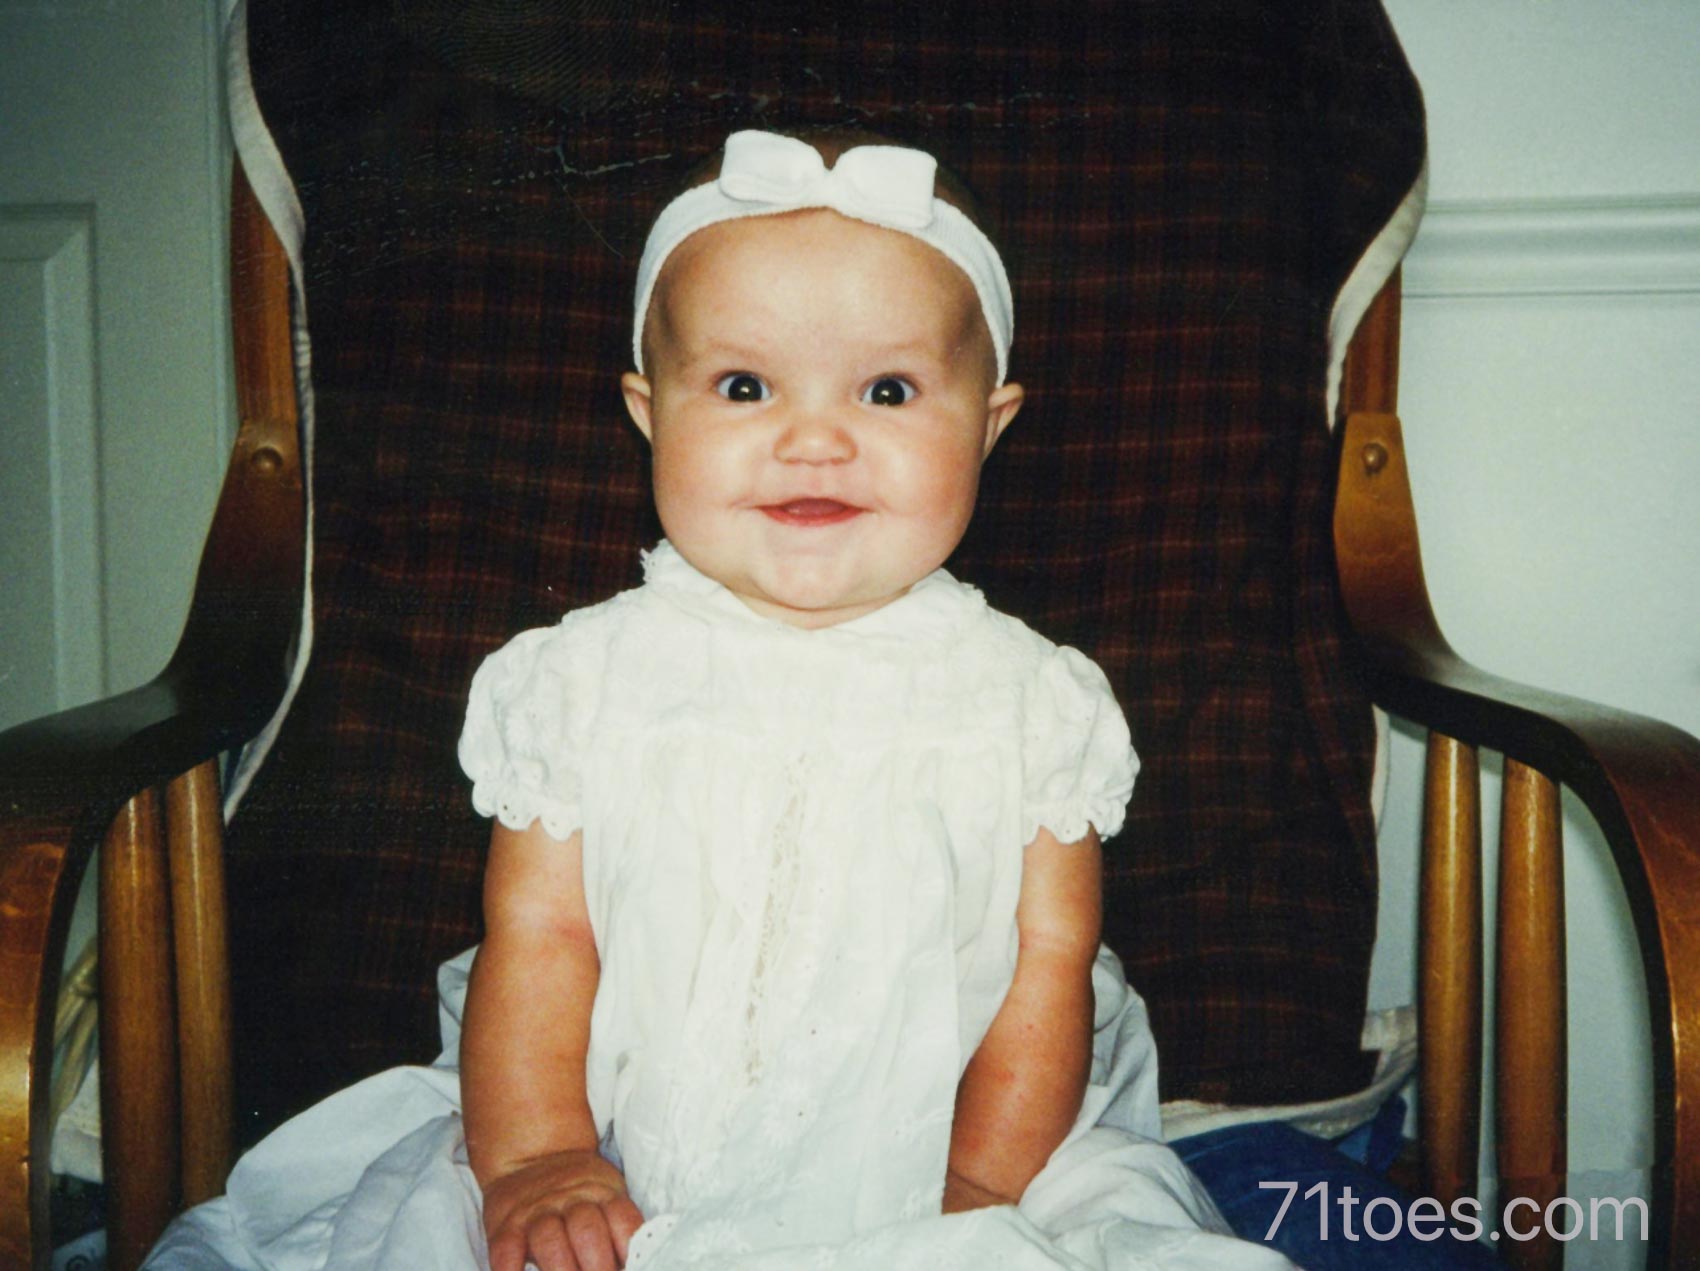 Abby in the same blessing dress when she was a baby